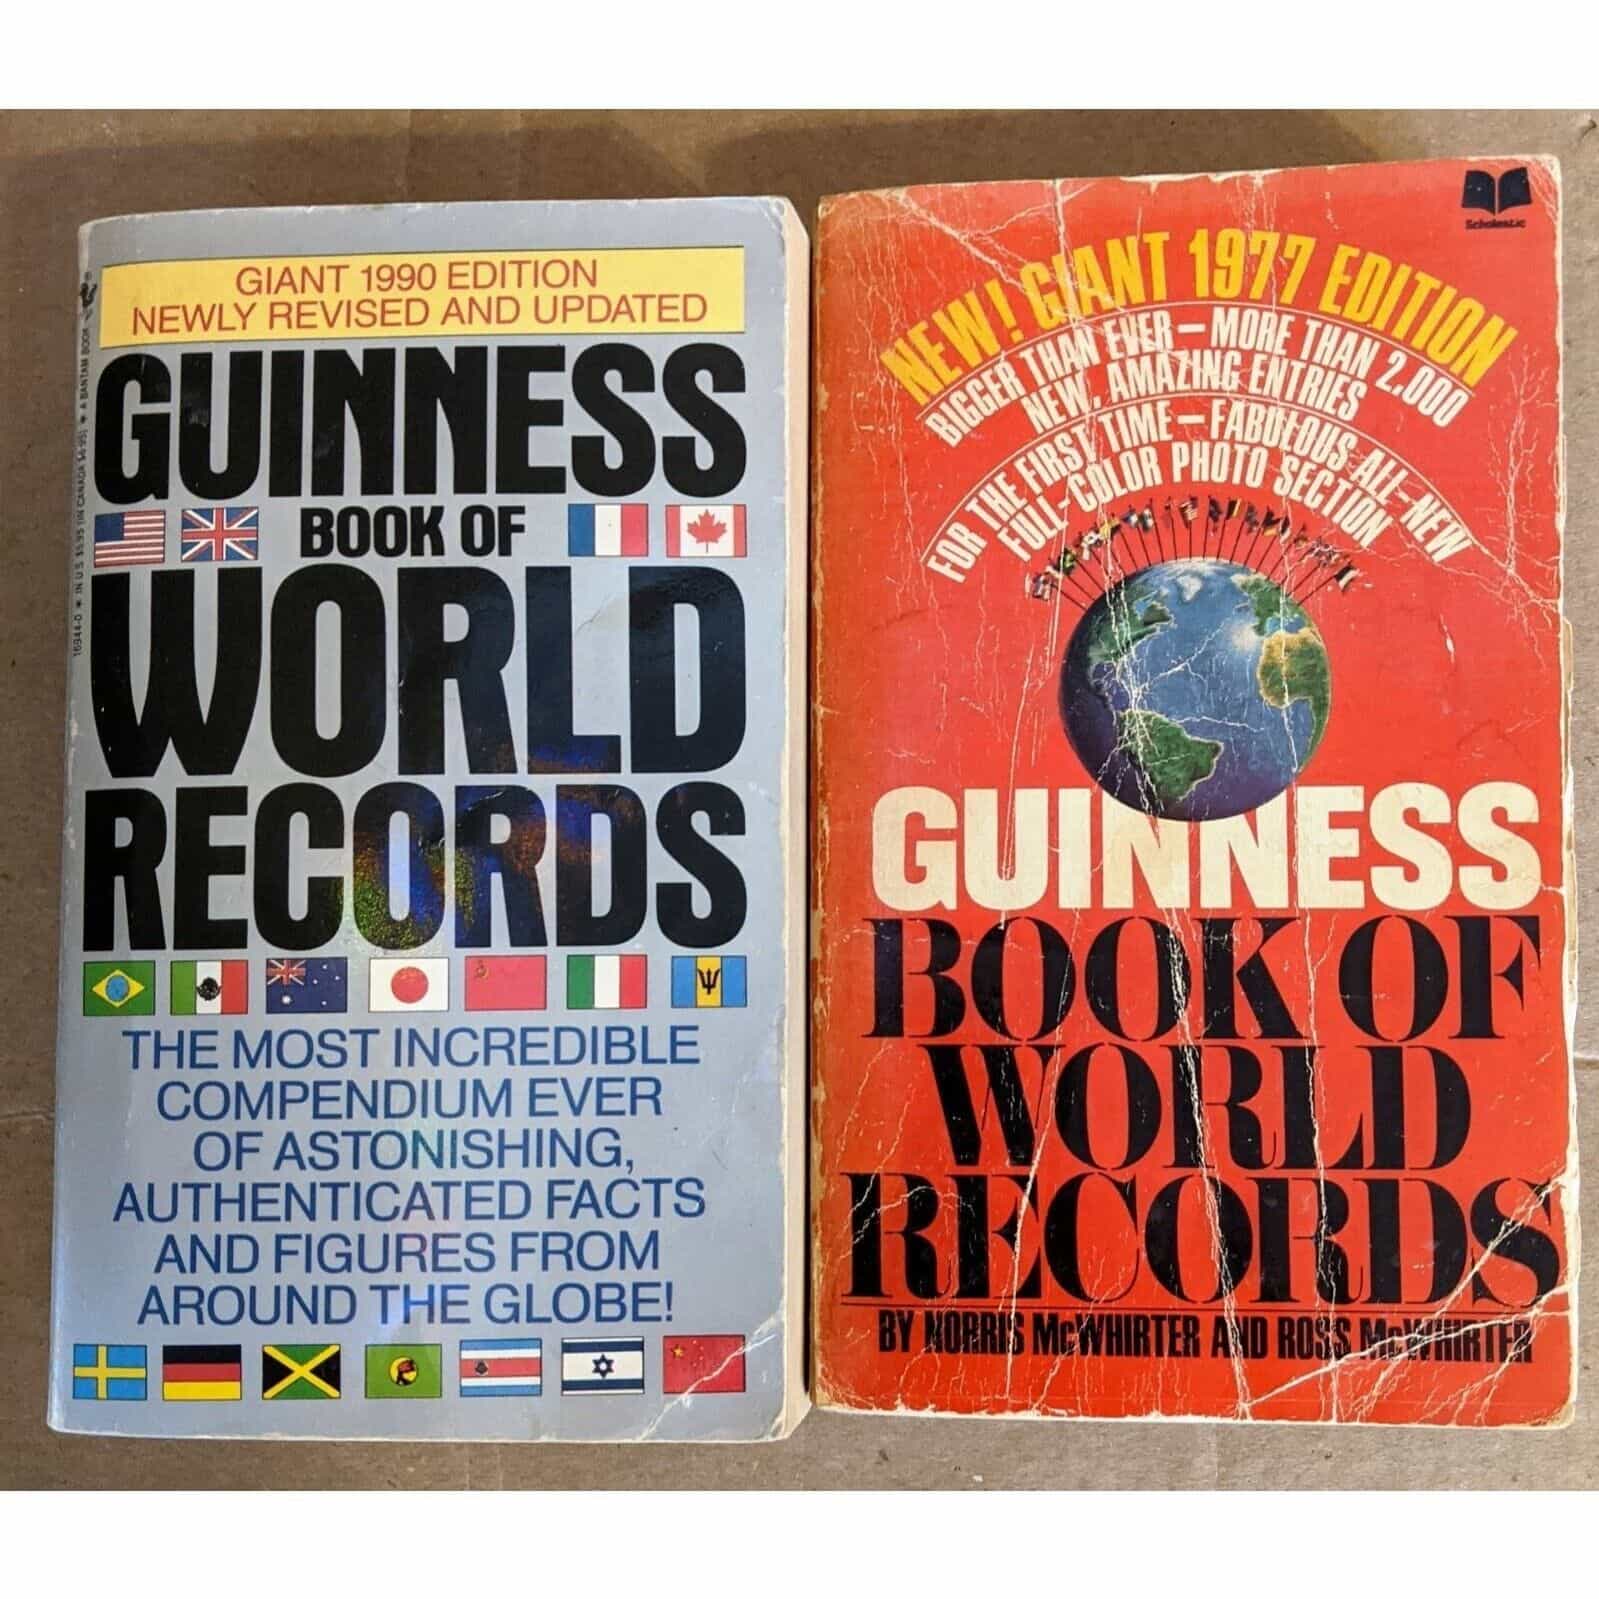 Guinness Book of World Records Set of 2 – 1977 & 1990